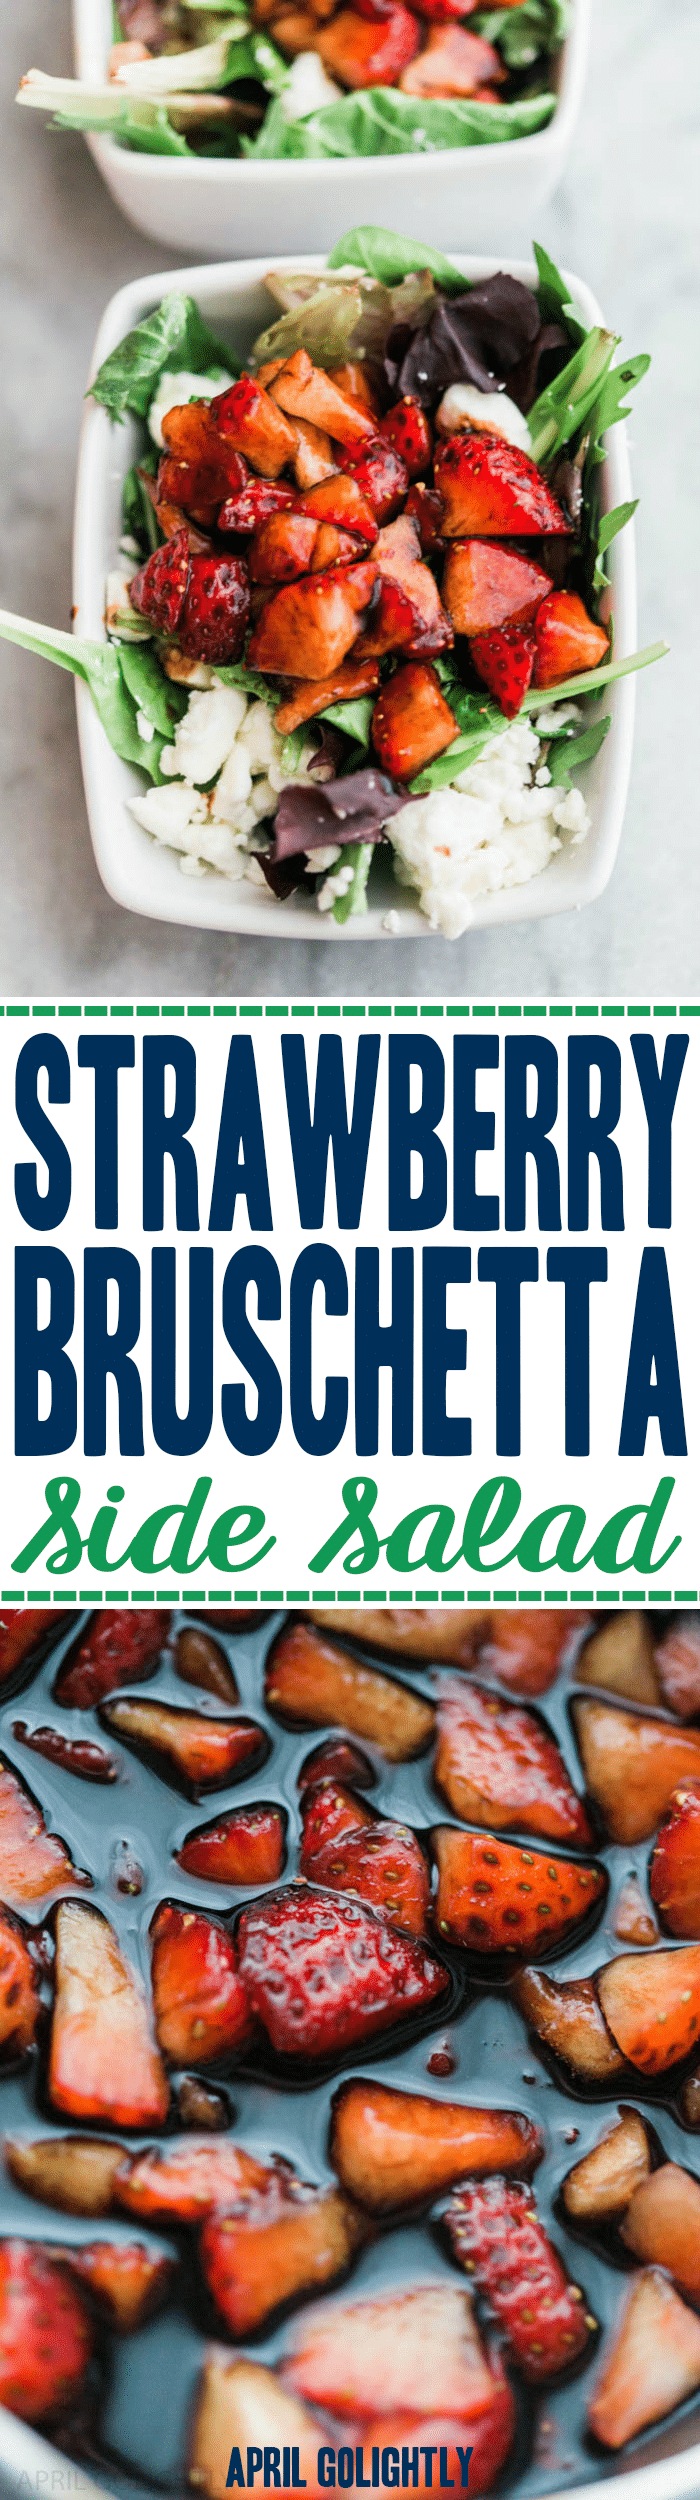 Strawberry Bruschetta Side Salad Recipe perfect healthy side salad and dish for any dinner this season #SundaySupper #FLStrawberry